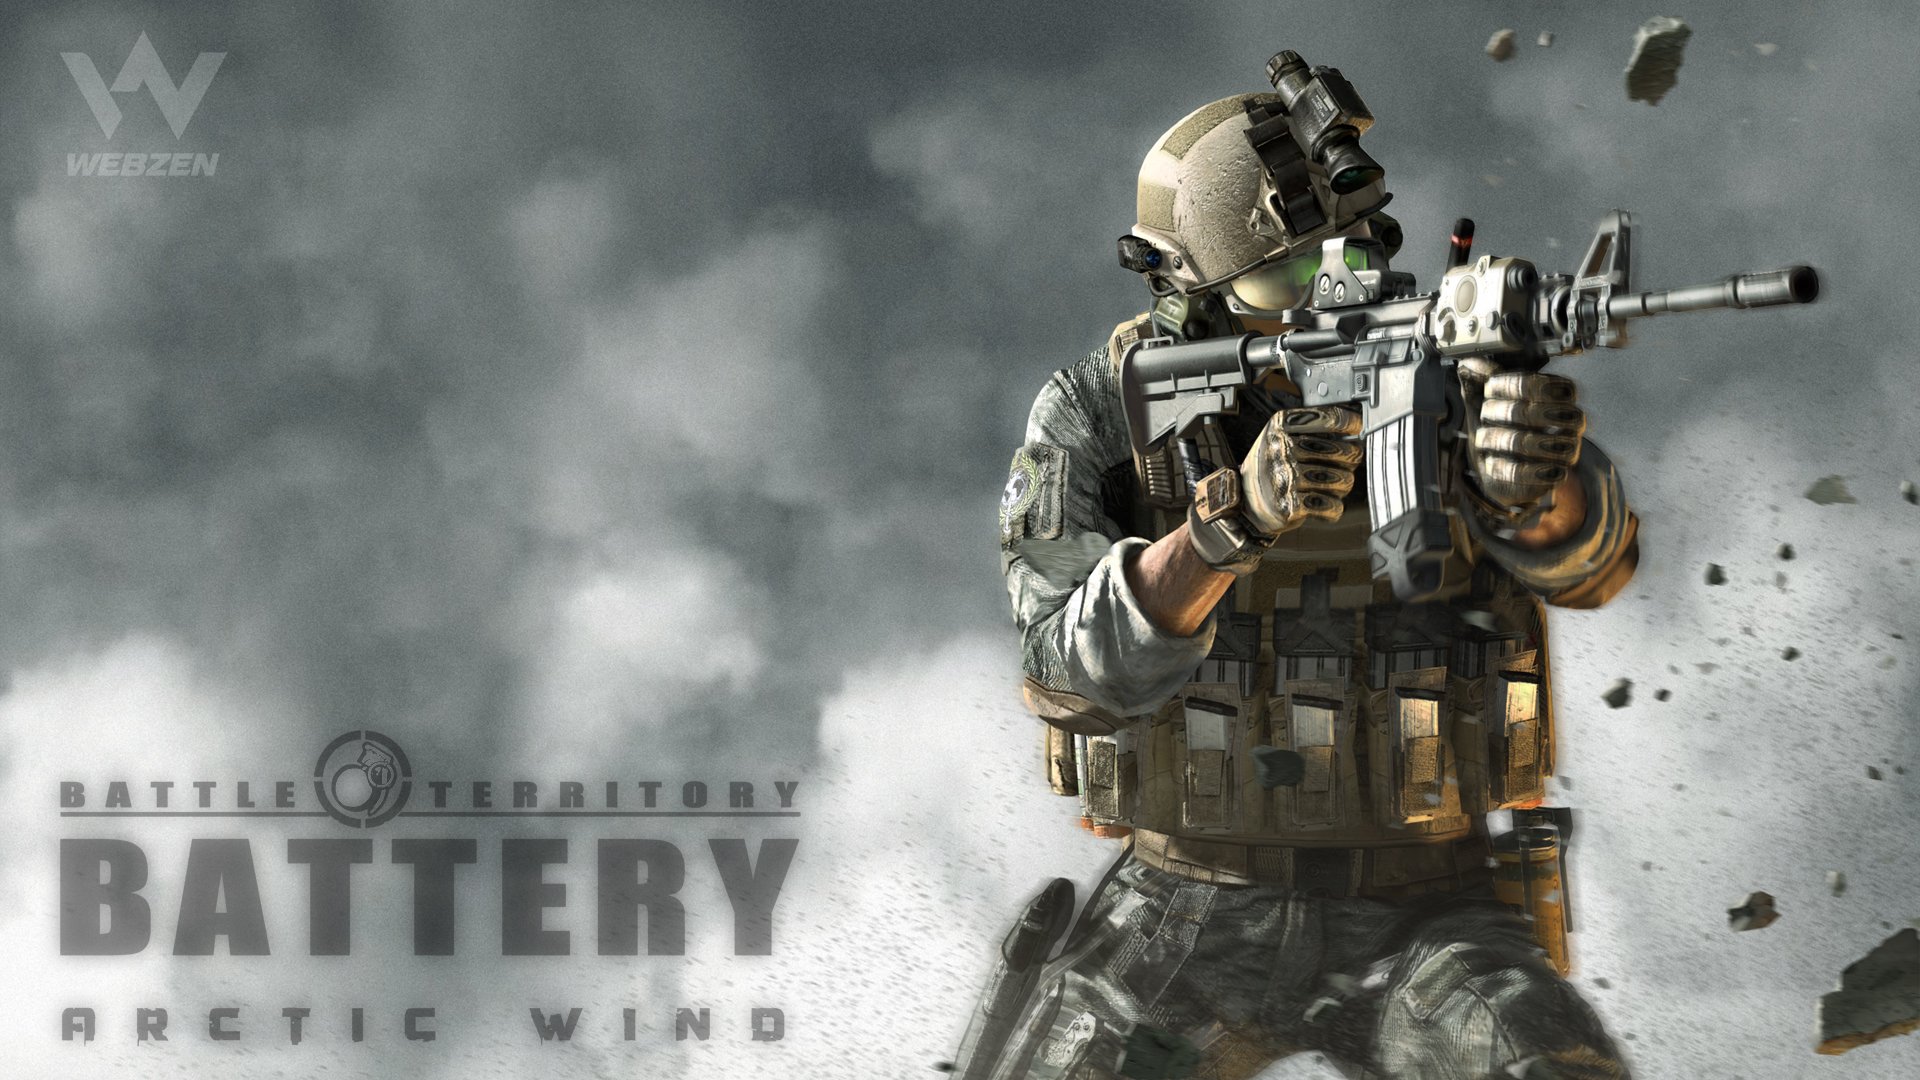 battery, Online, Military, Shooter, Fps, Action, Fighting, War, Warrior, Soldier, 1batto, Mmo, Rpg, Combat, Tactical, Weapon, Gun, Assault, Rifle, Poster Wallpaper